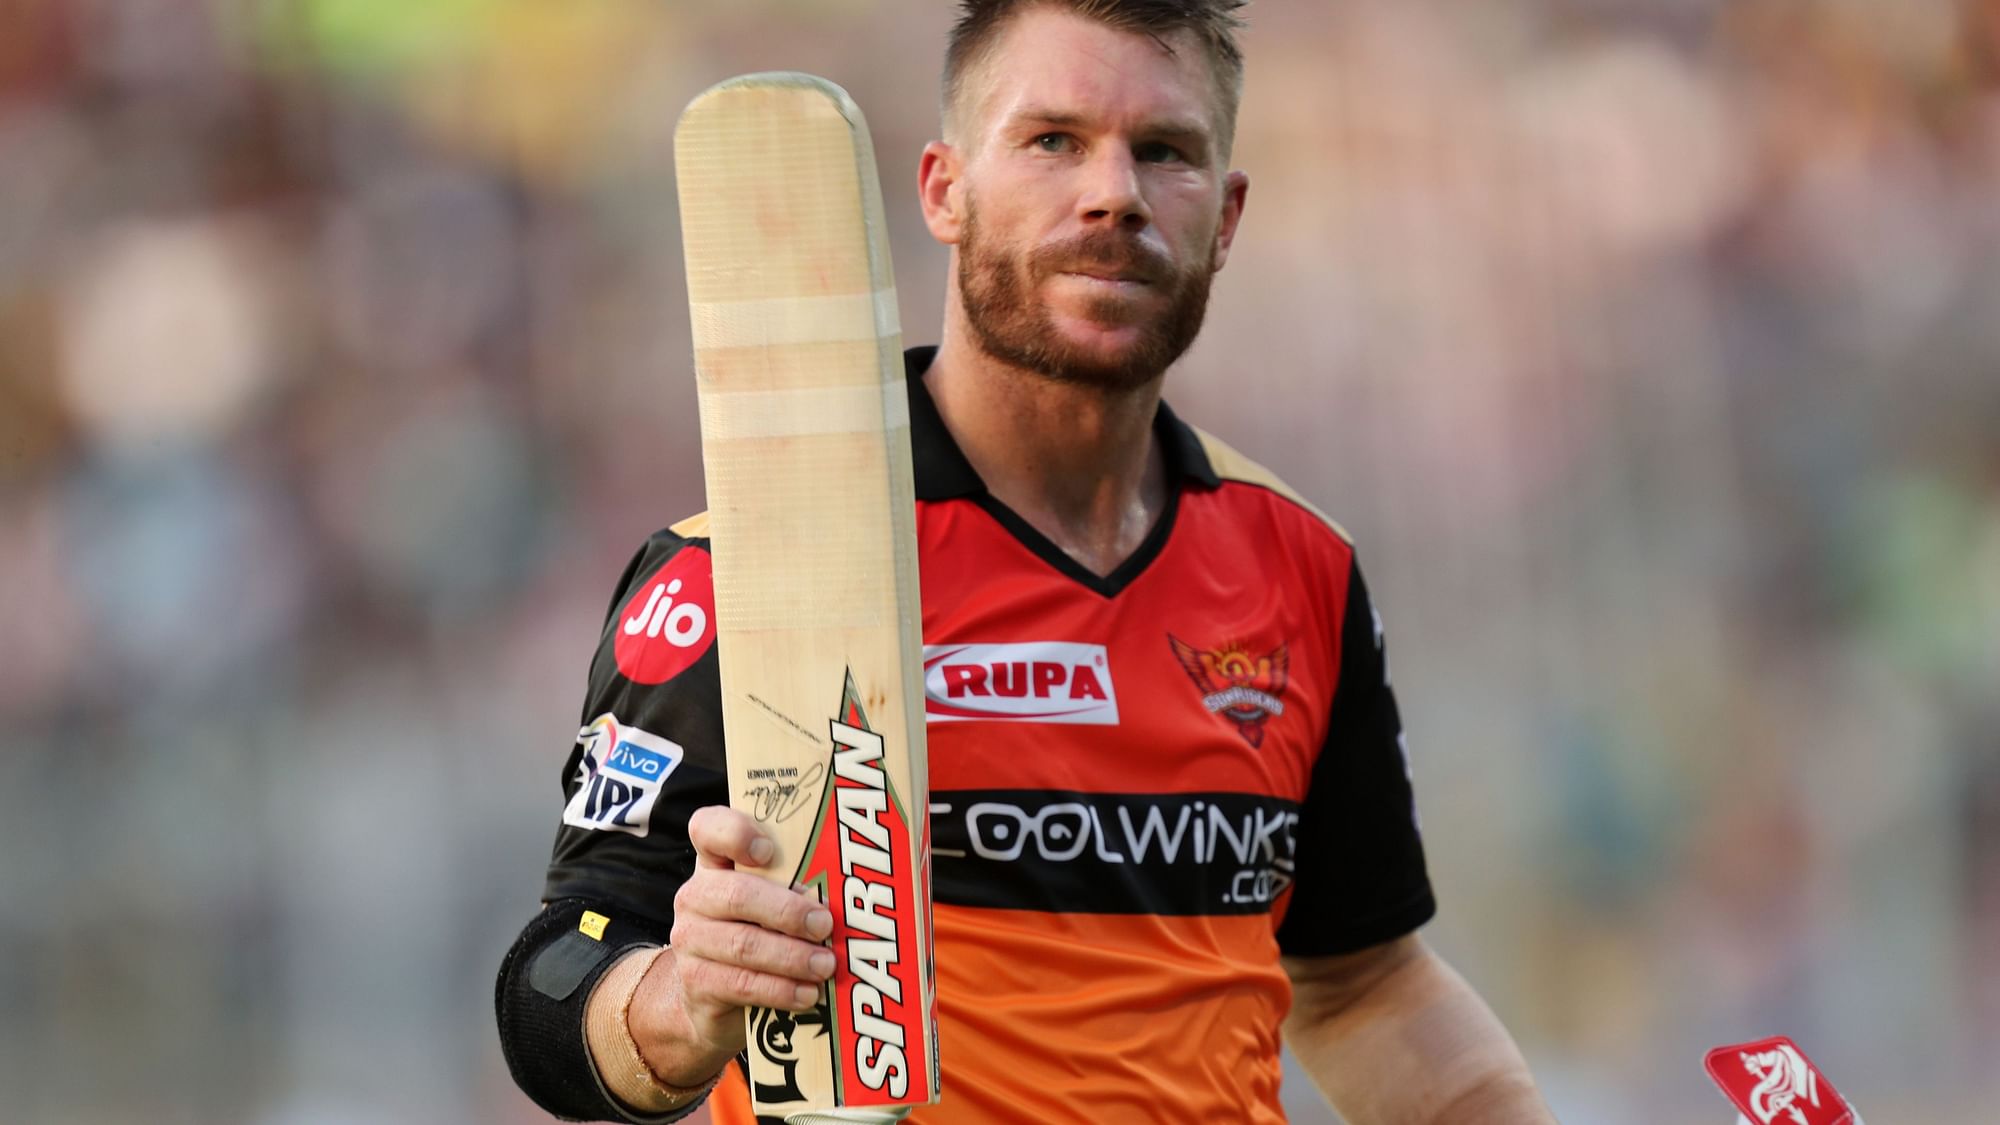 David Warner reached his fifty off 31 balls and his innings of 85 comprised 9 fours and 3 sixes at a strike rate of 160.38.